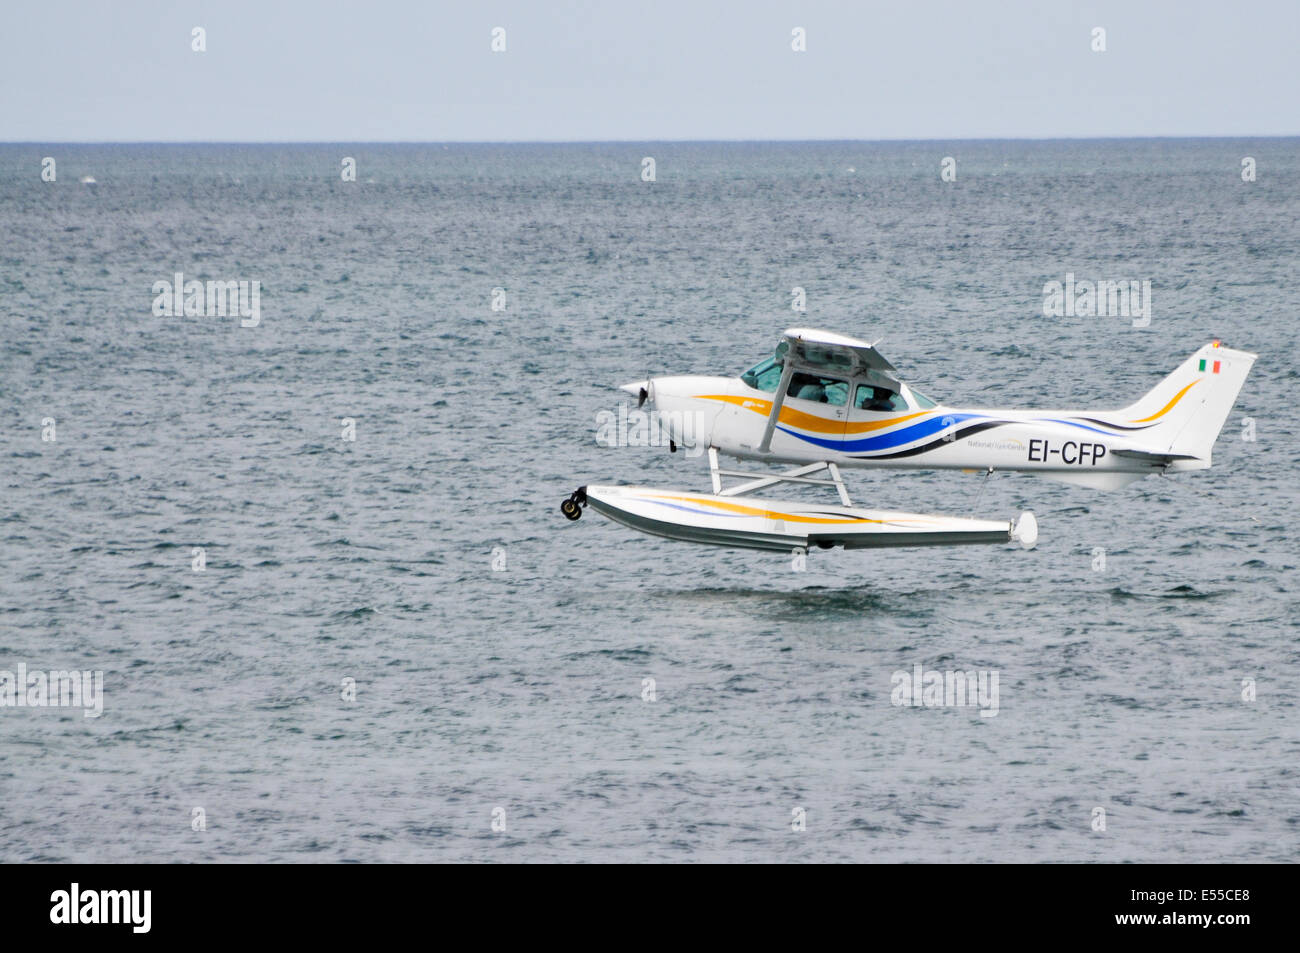 Cessna 172 (EPI-CFP), 1980, owned by William Flood, fitted with floats, Avco Lycoming engine,  lands on sea at the 2014 Bray Air Show, Ireland Stock Photo